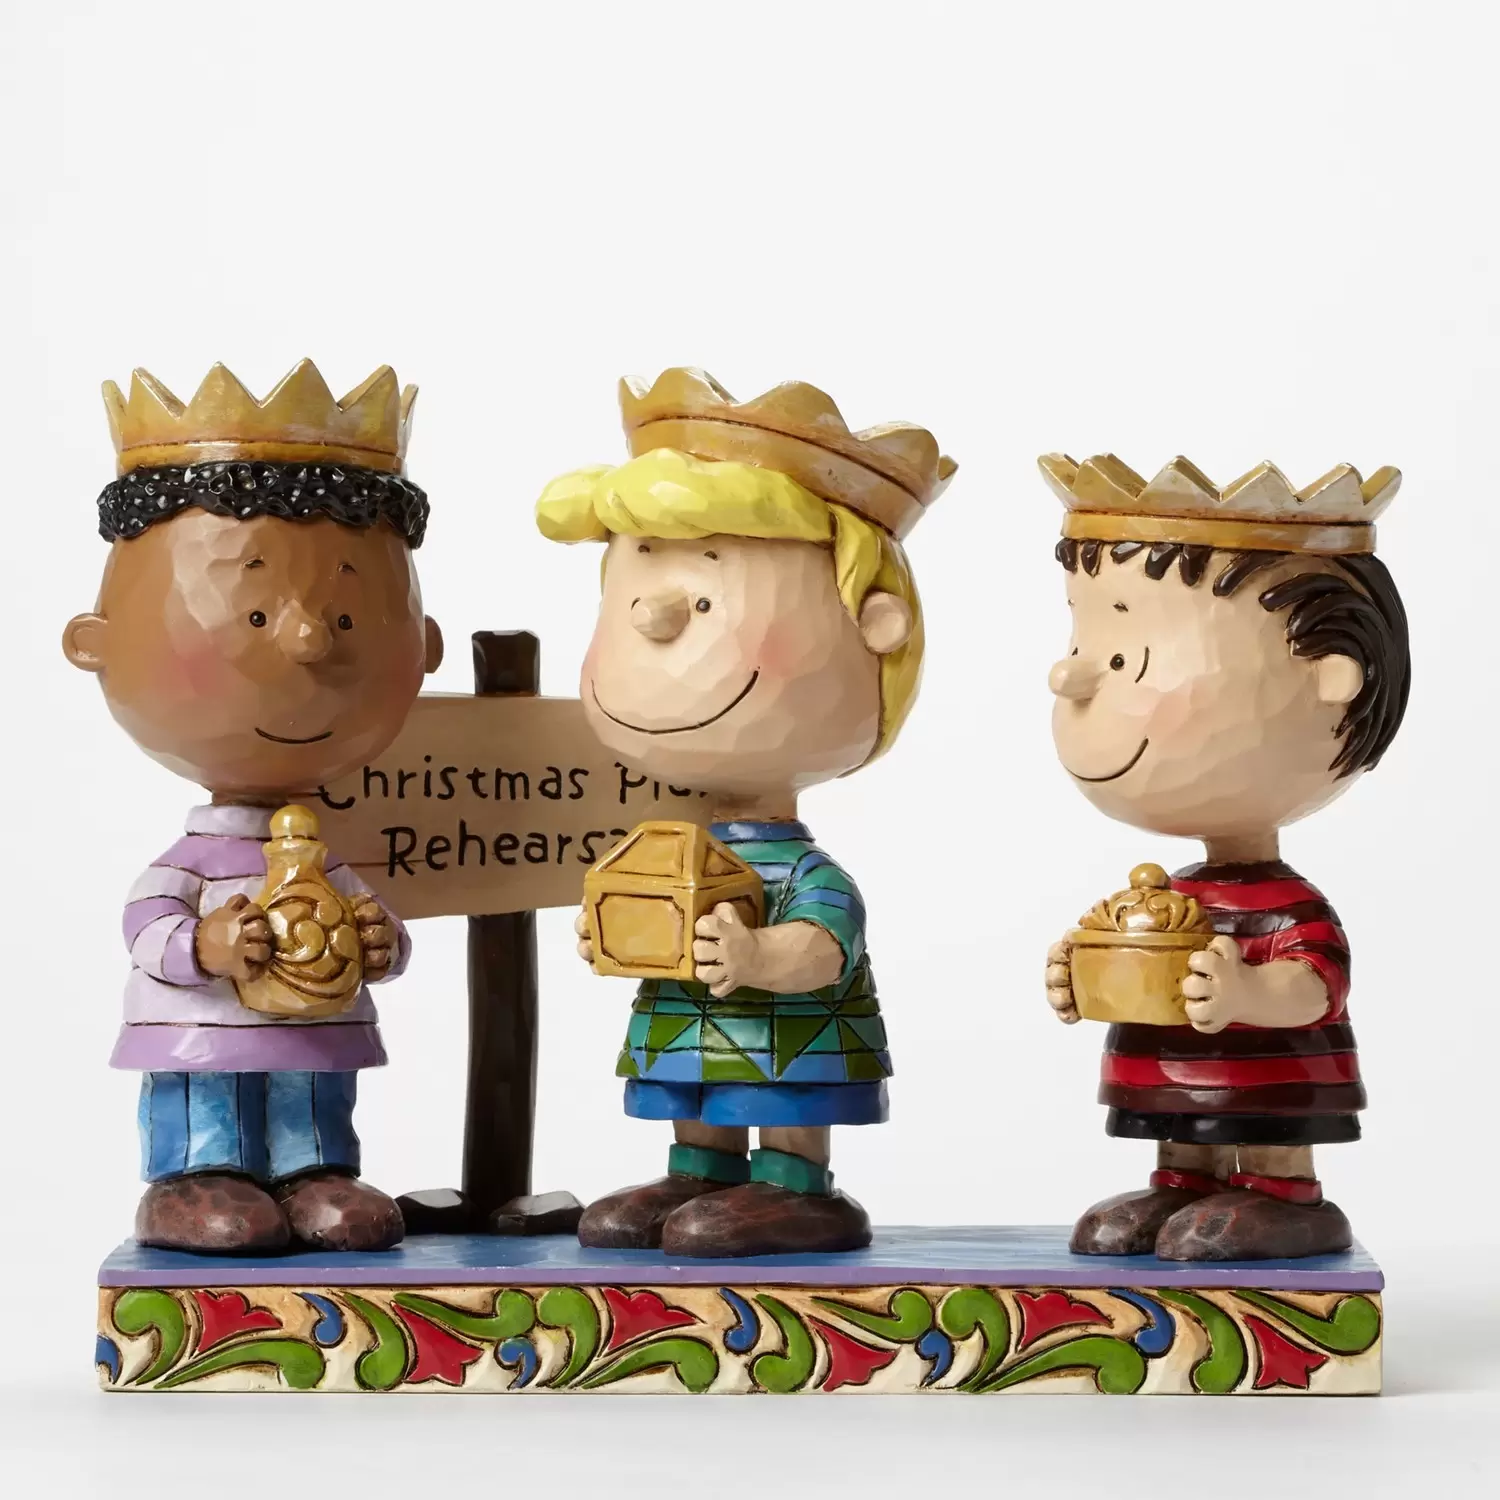 Peanuts - Jim Shore - Practice Makes Perfect - 3 Wise Men Franklin, Schroeder, and Linus